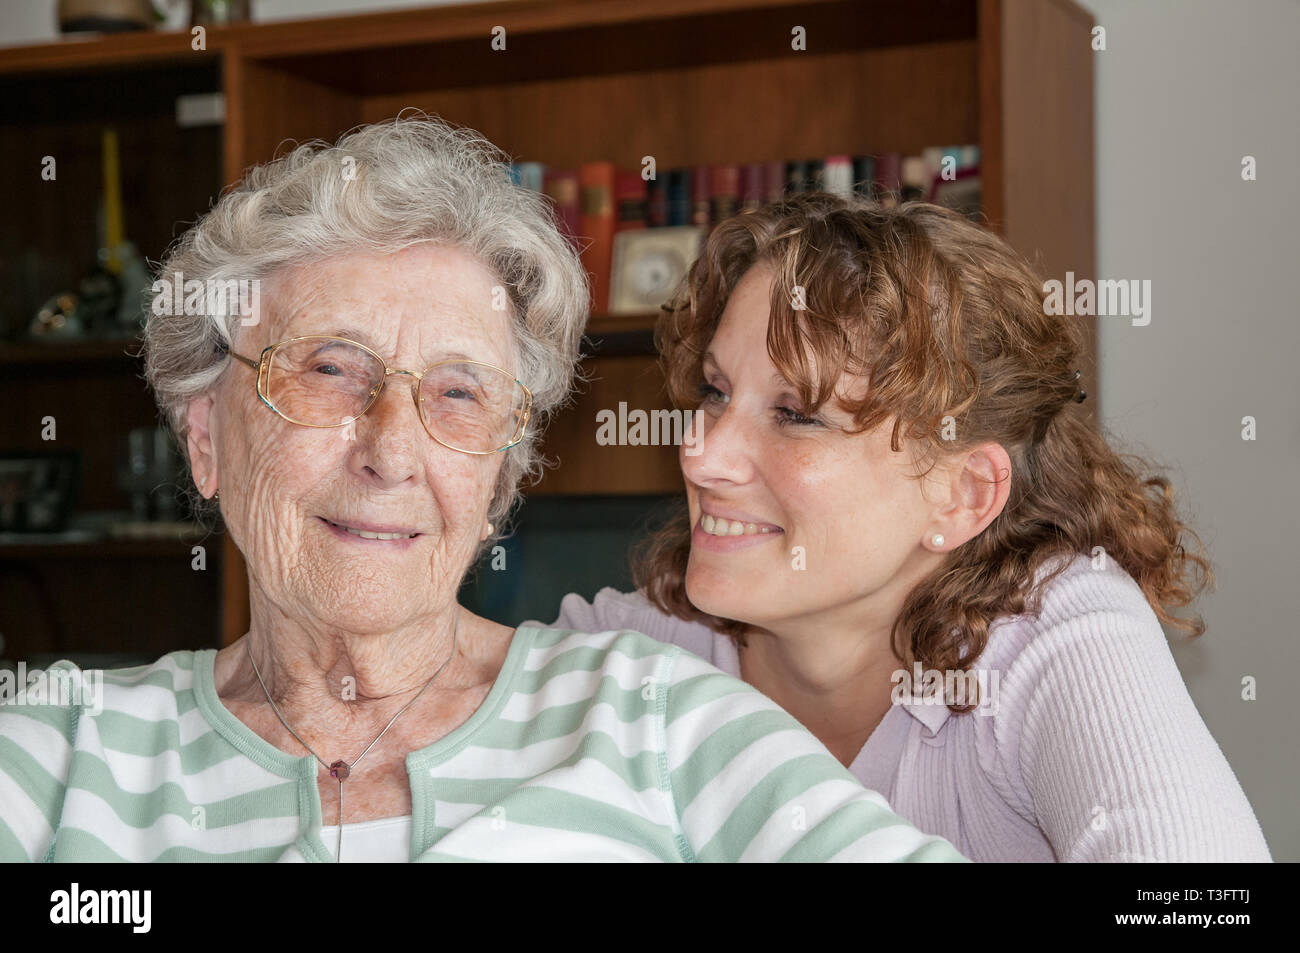 Portrait of smiling senior lady and young granddaughter Stock Photo